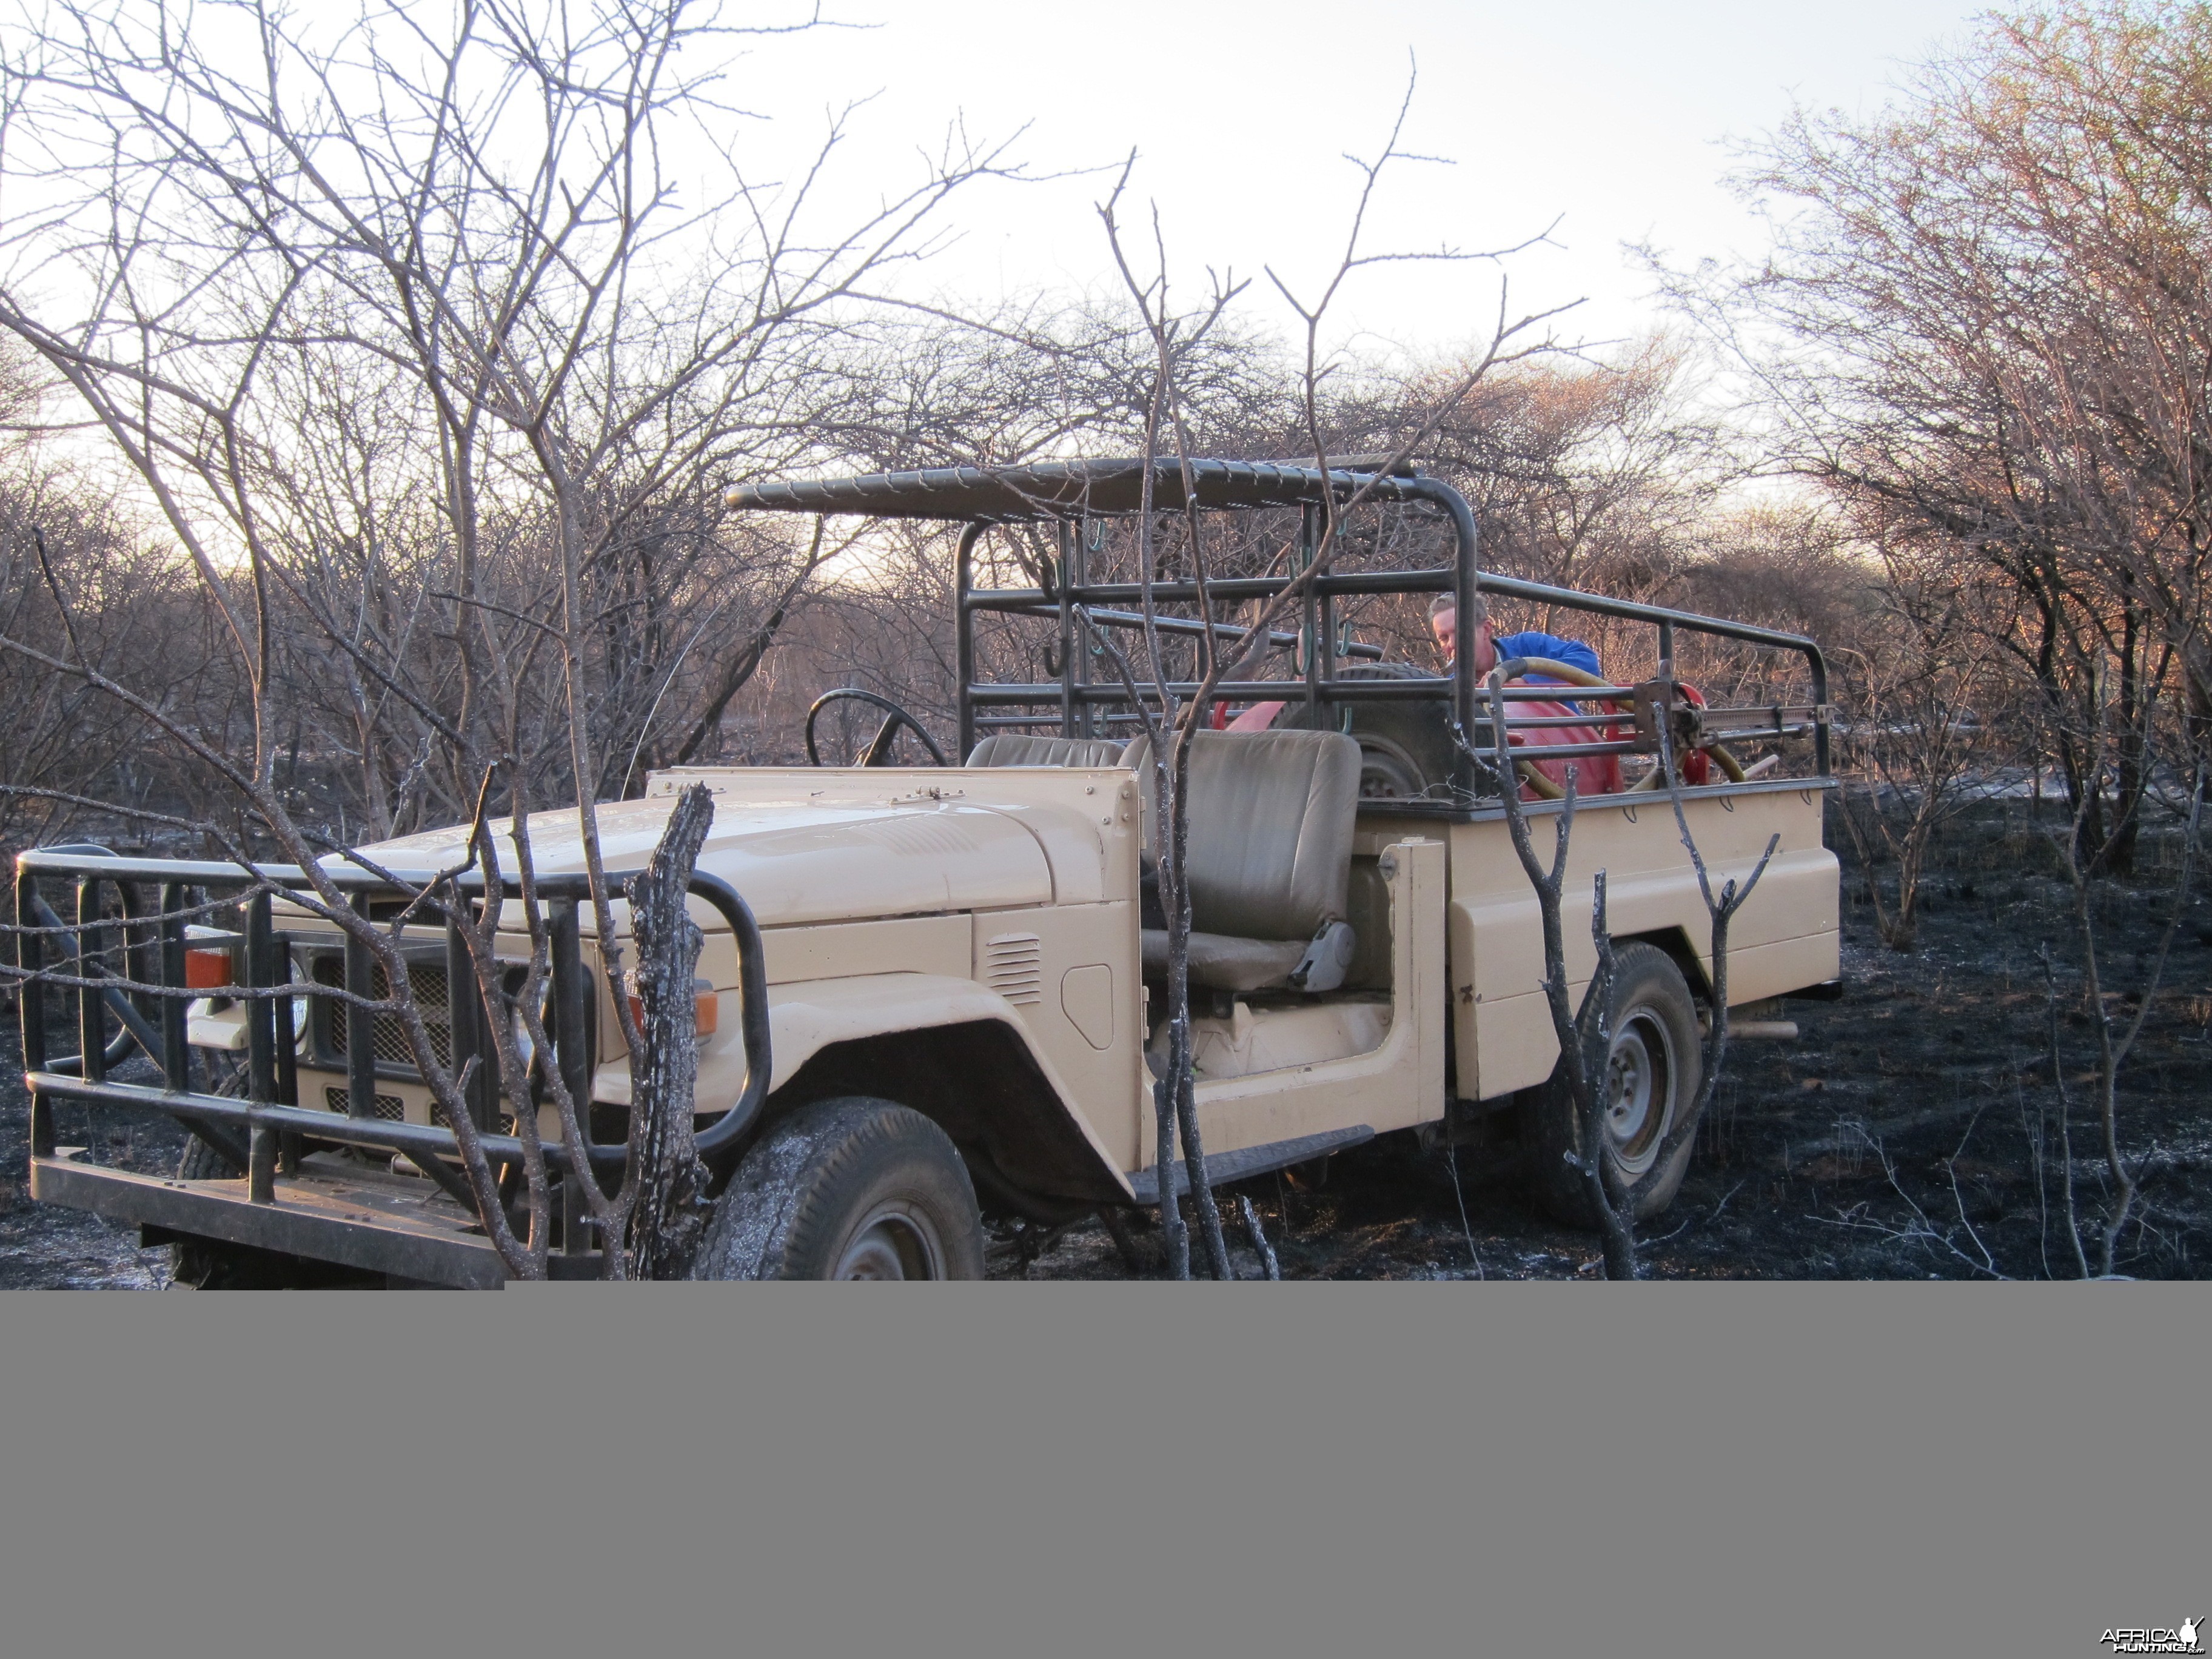 Controlled Bush Fire Namibia